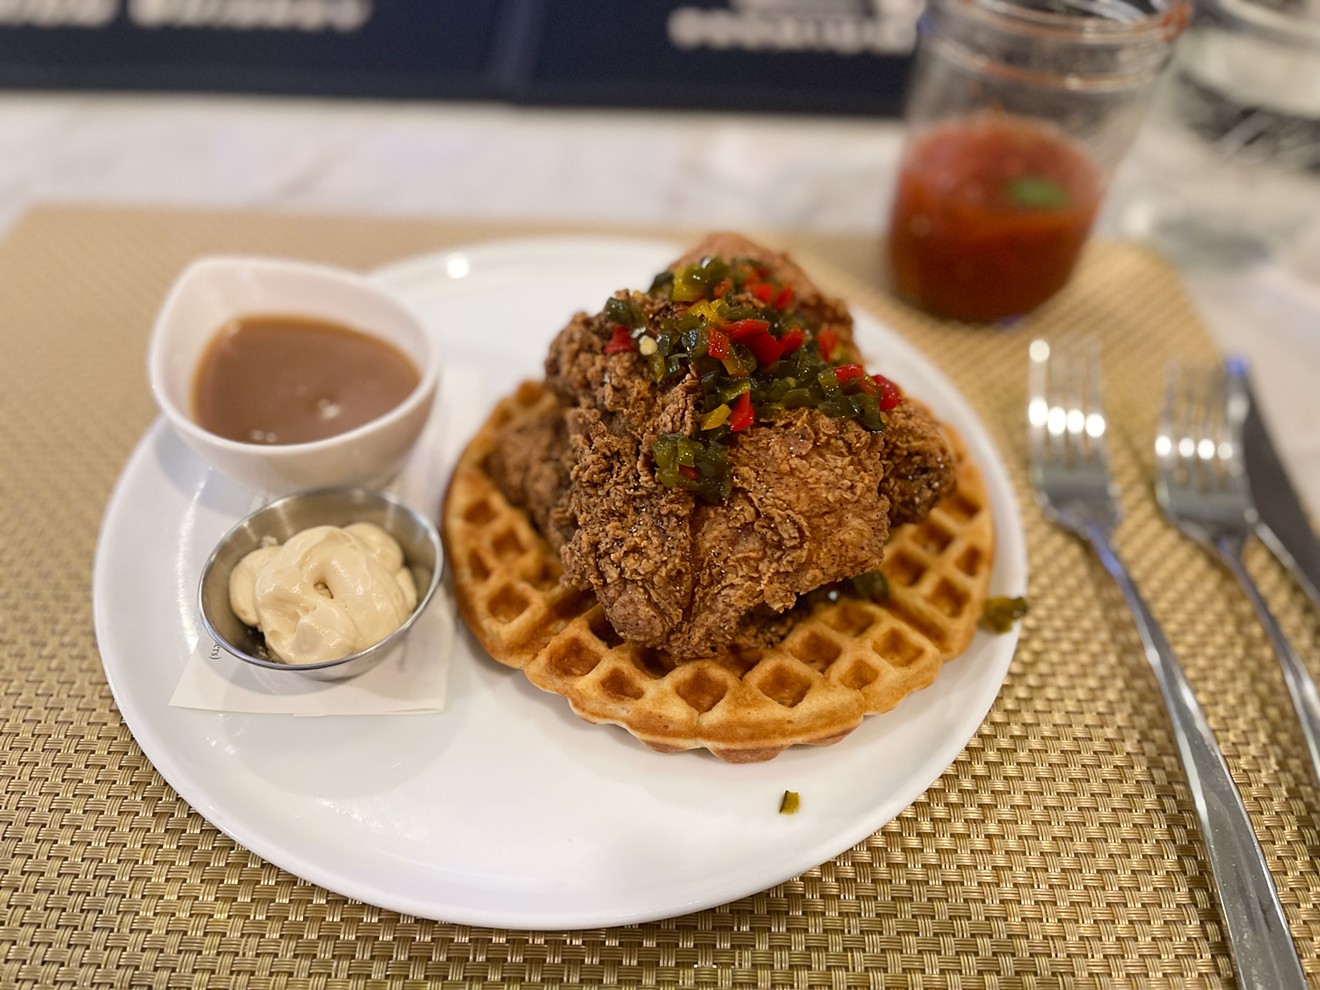 The praline syrup sends the chicken and waffles over the edge.